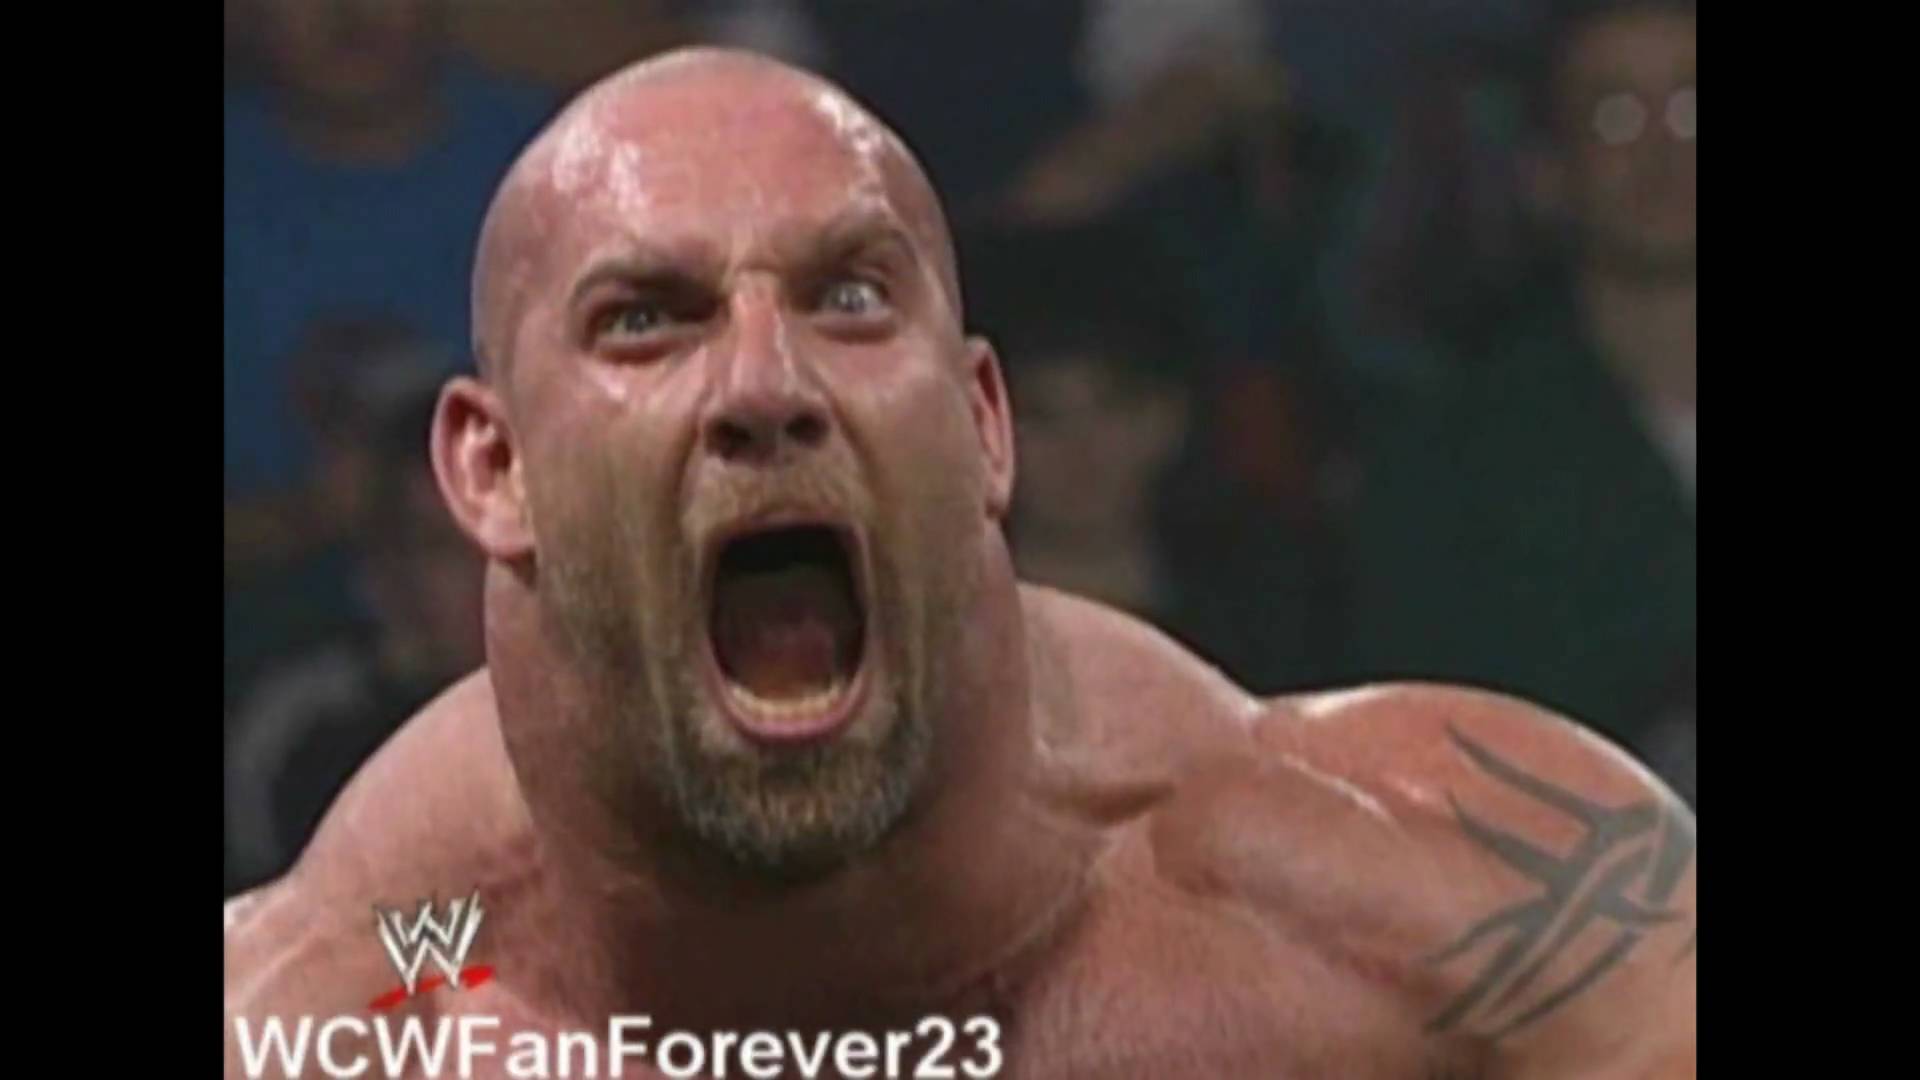 Several images of an angry Bill Goldberg (WCW/WWE) and his fuckin ...